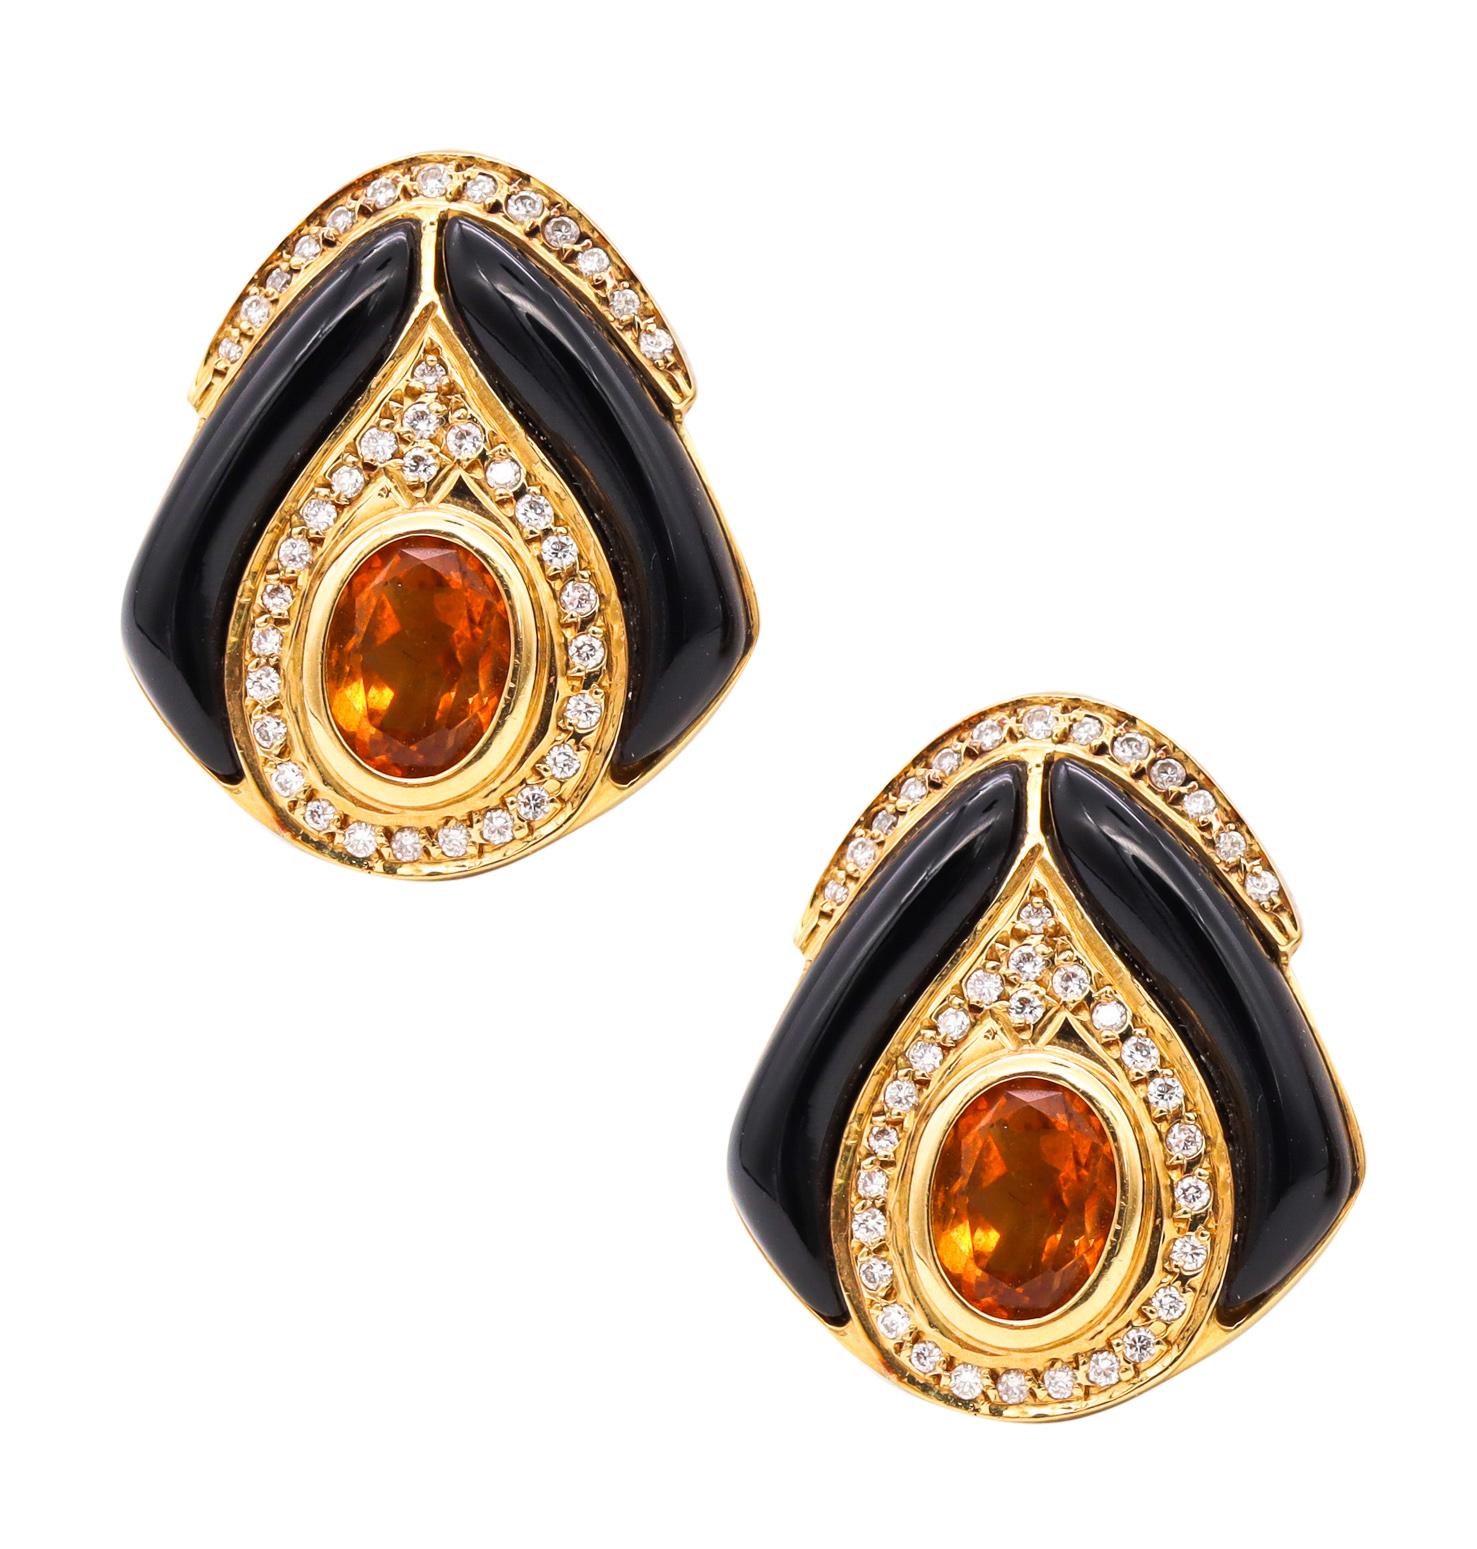 Pair of Gem Set Italian Earrings.

Beautiful designer's Post-modernist trillion shaped pair, crafted in Italy in solid yellow gold of 18 karats, with high polished finish. They are suited, with posts (Removable) for pierced ears and a pair of